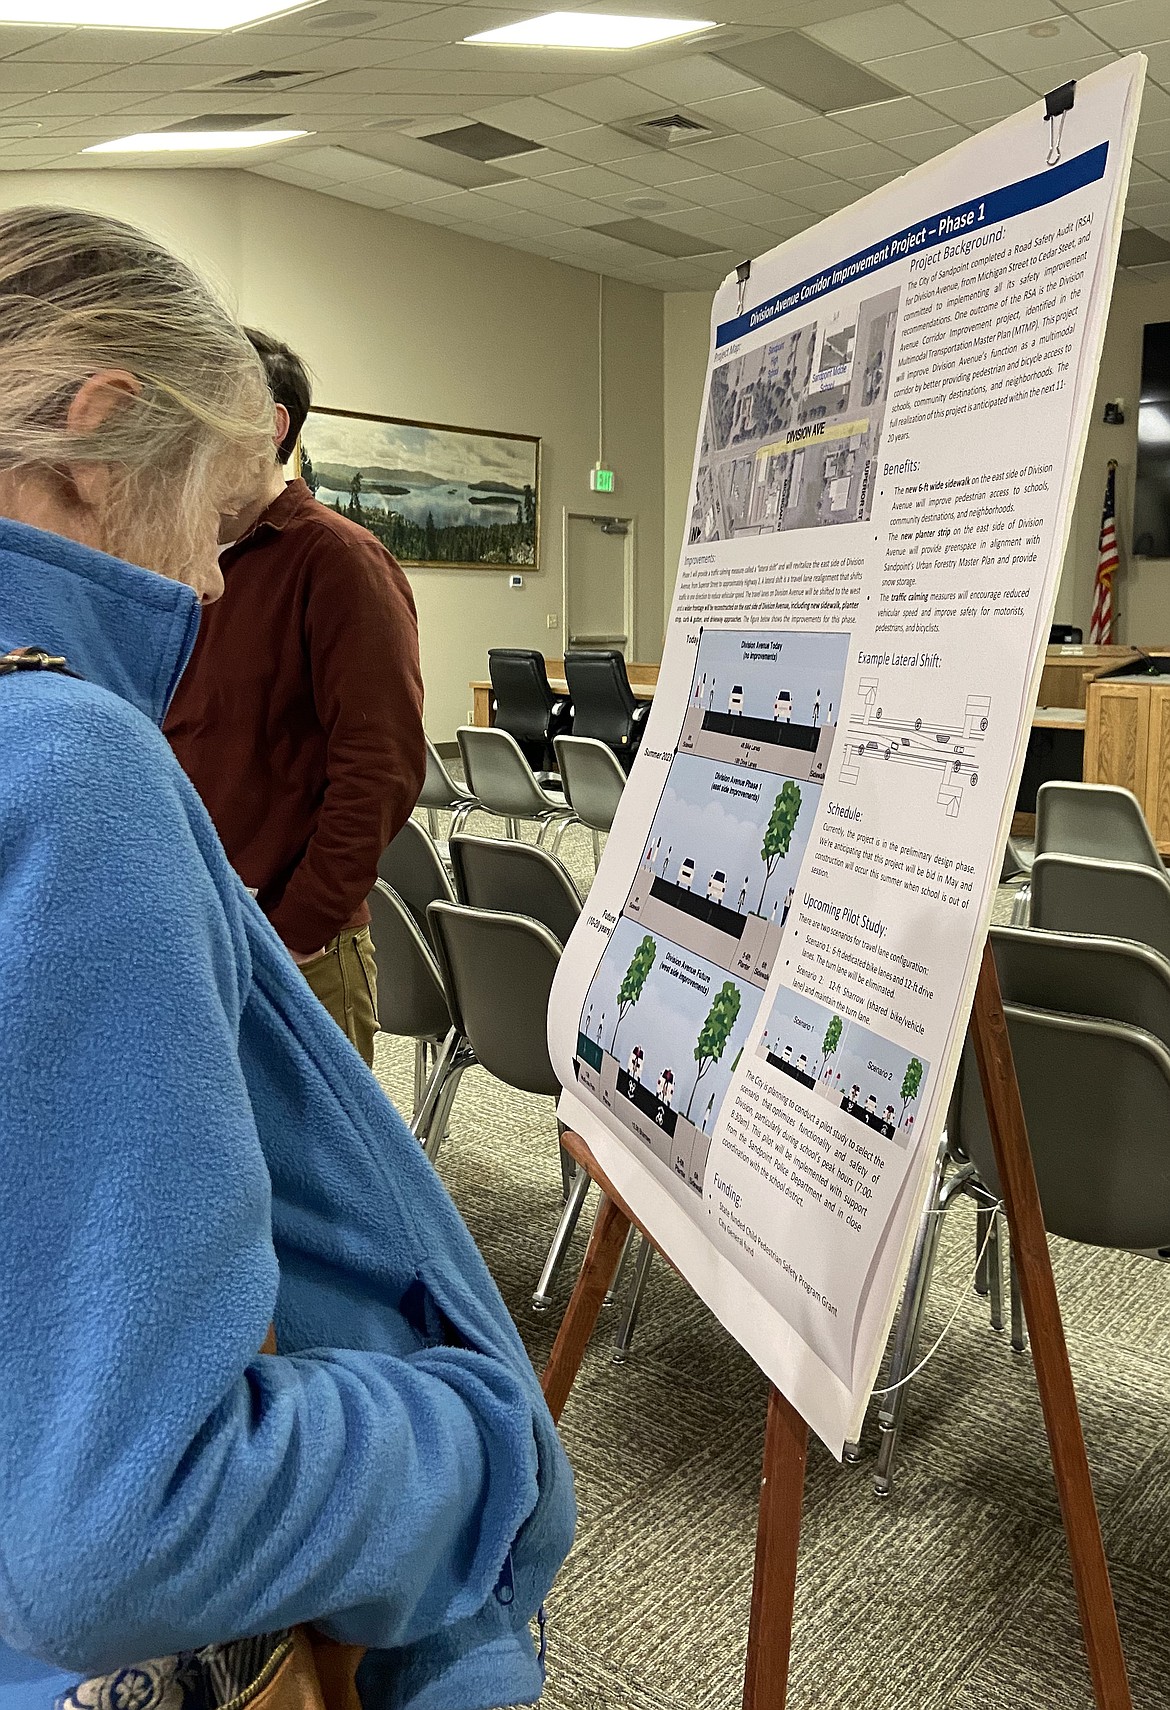 A resident examines one of the information sheets detailing the Division Corridor Project at Wednesday's open house event seeking input on the project.